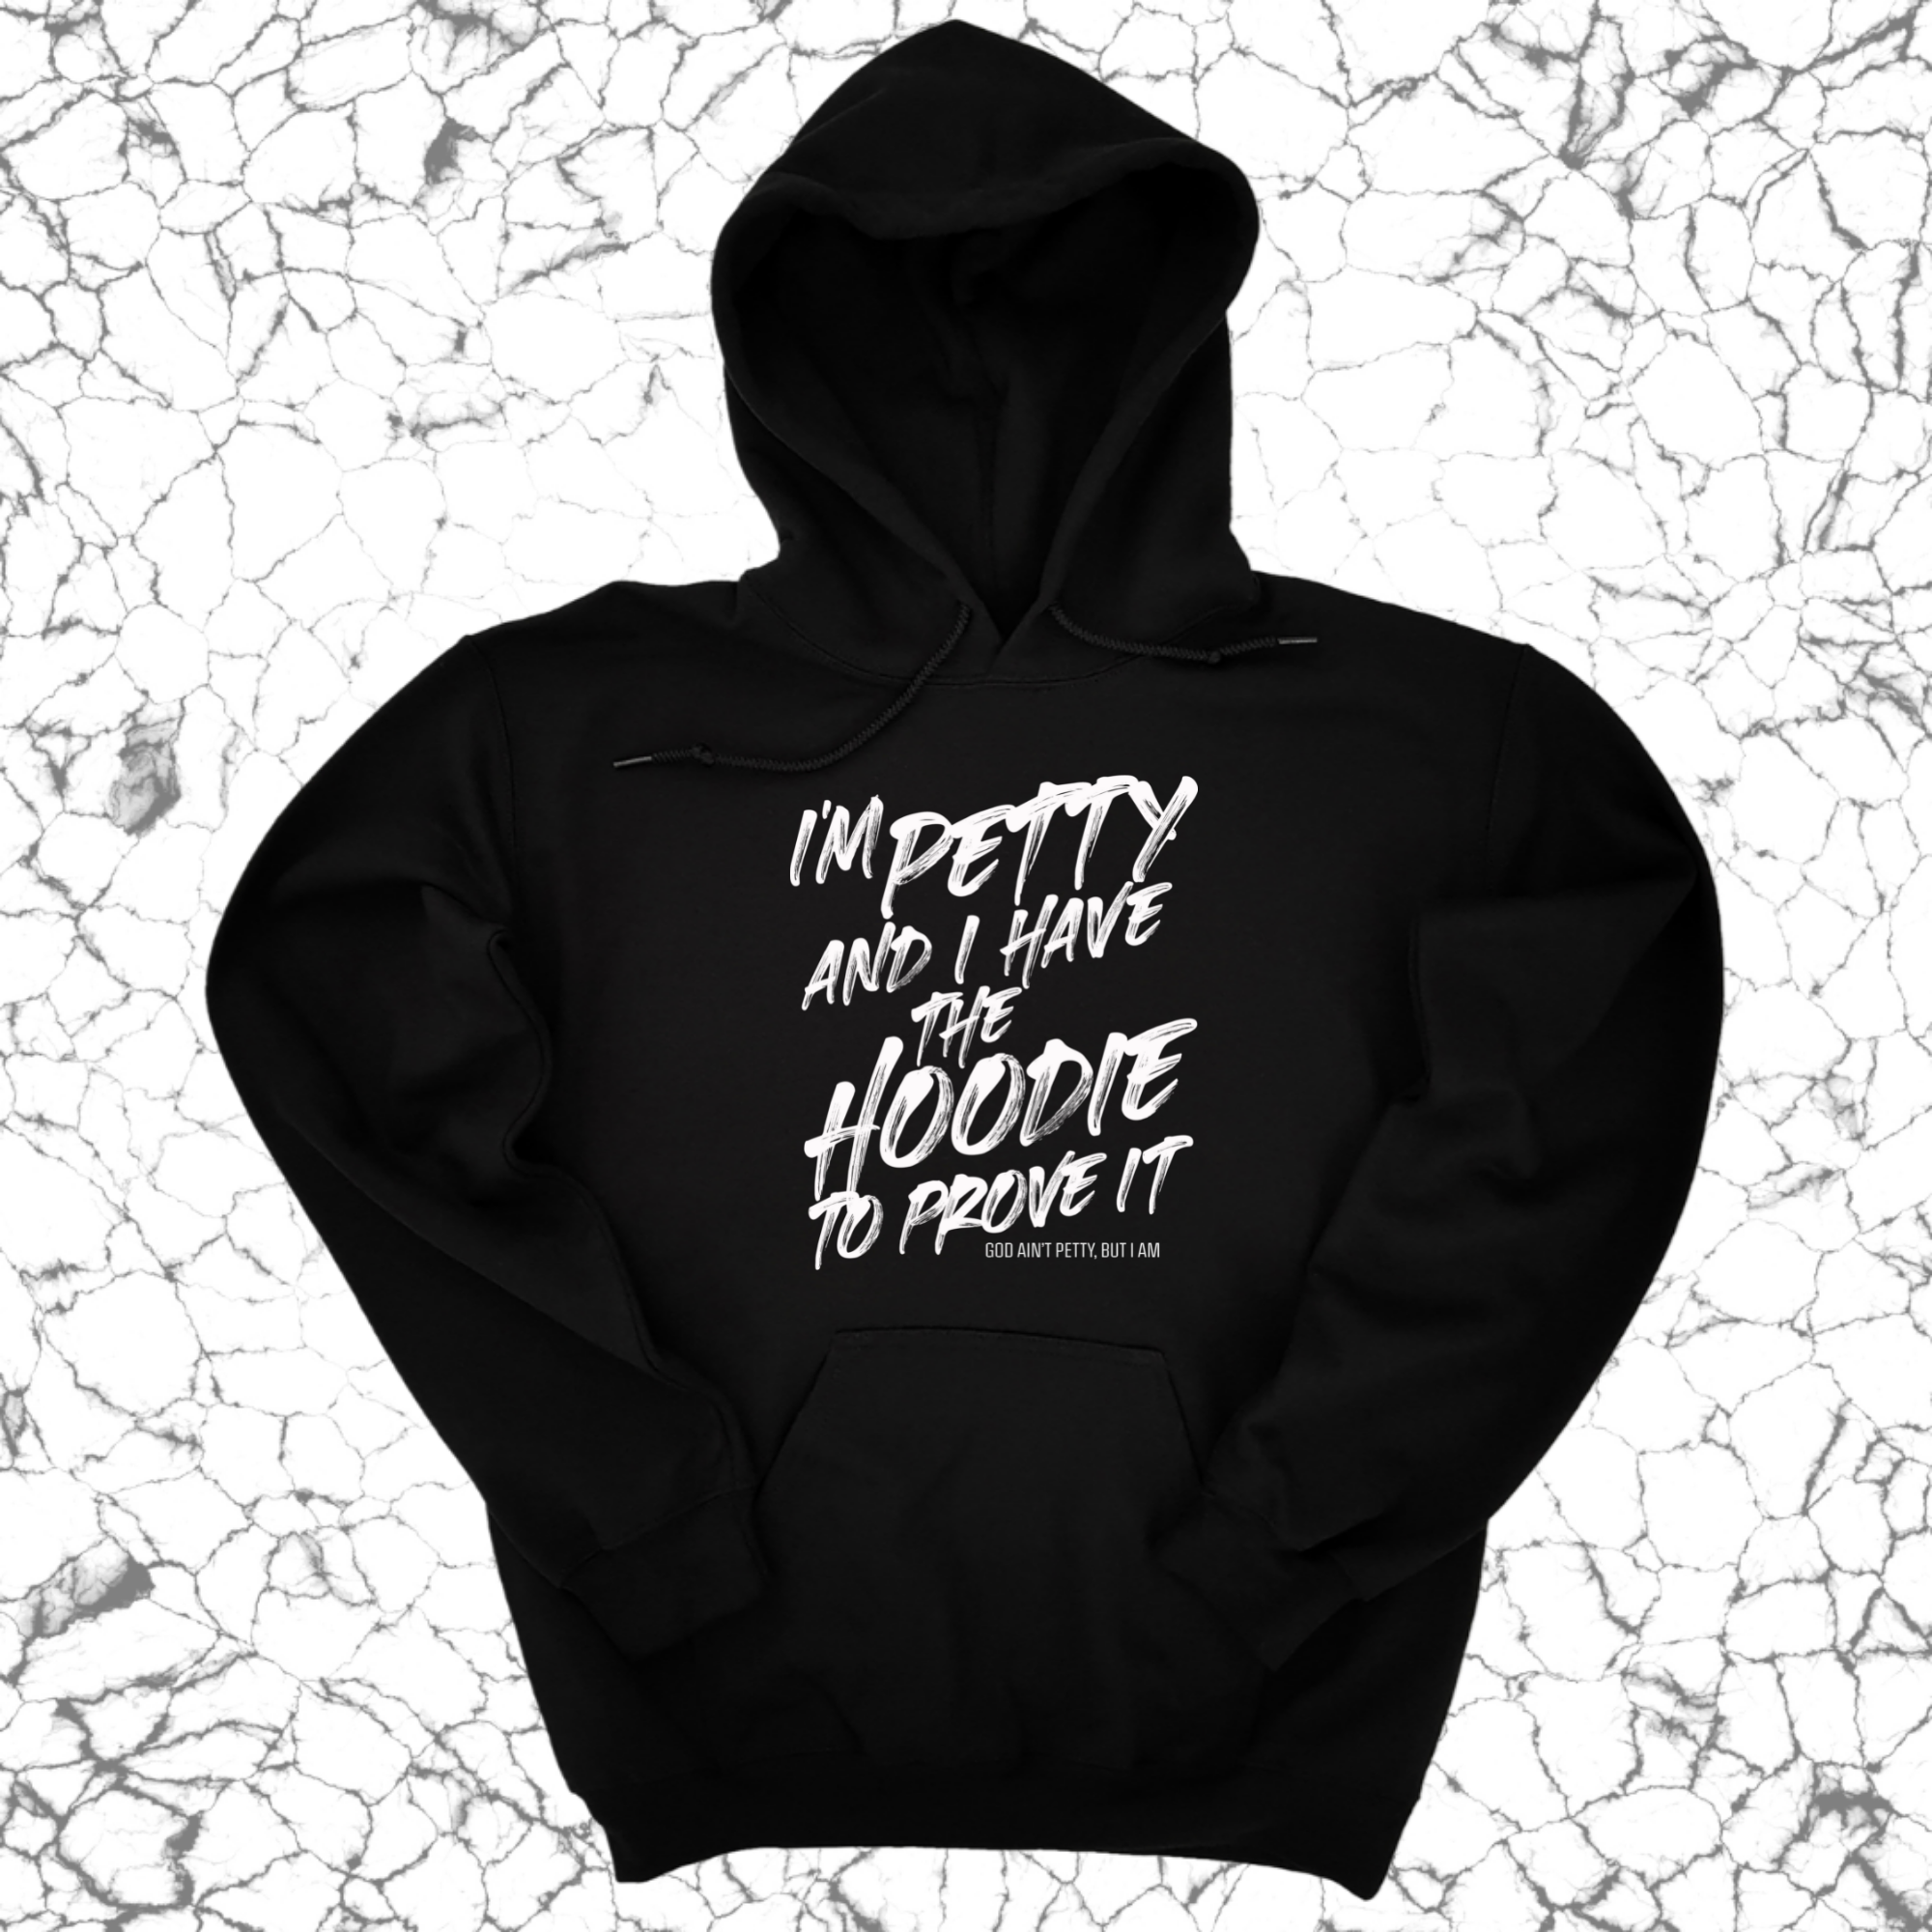 IMPERFECT -I'M PETTY AND I HAVE THE HOODIE TO PROVE IT HOODIE BLACK/WHITE 3XL-The Original God Ain't Petty But I Am